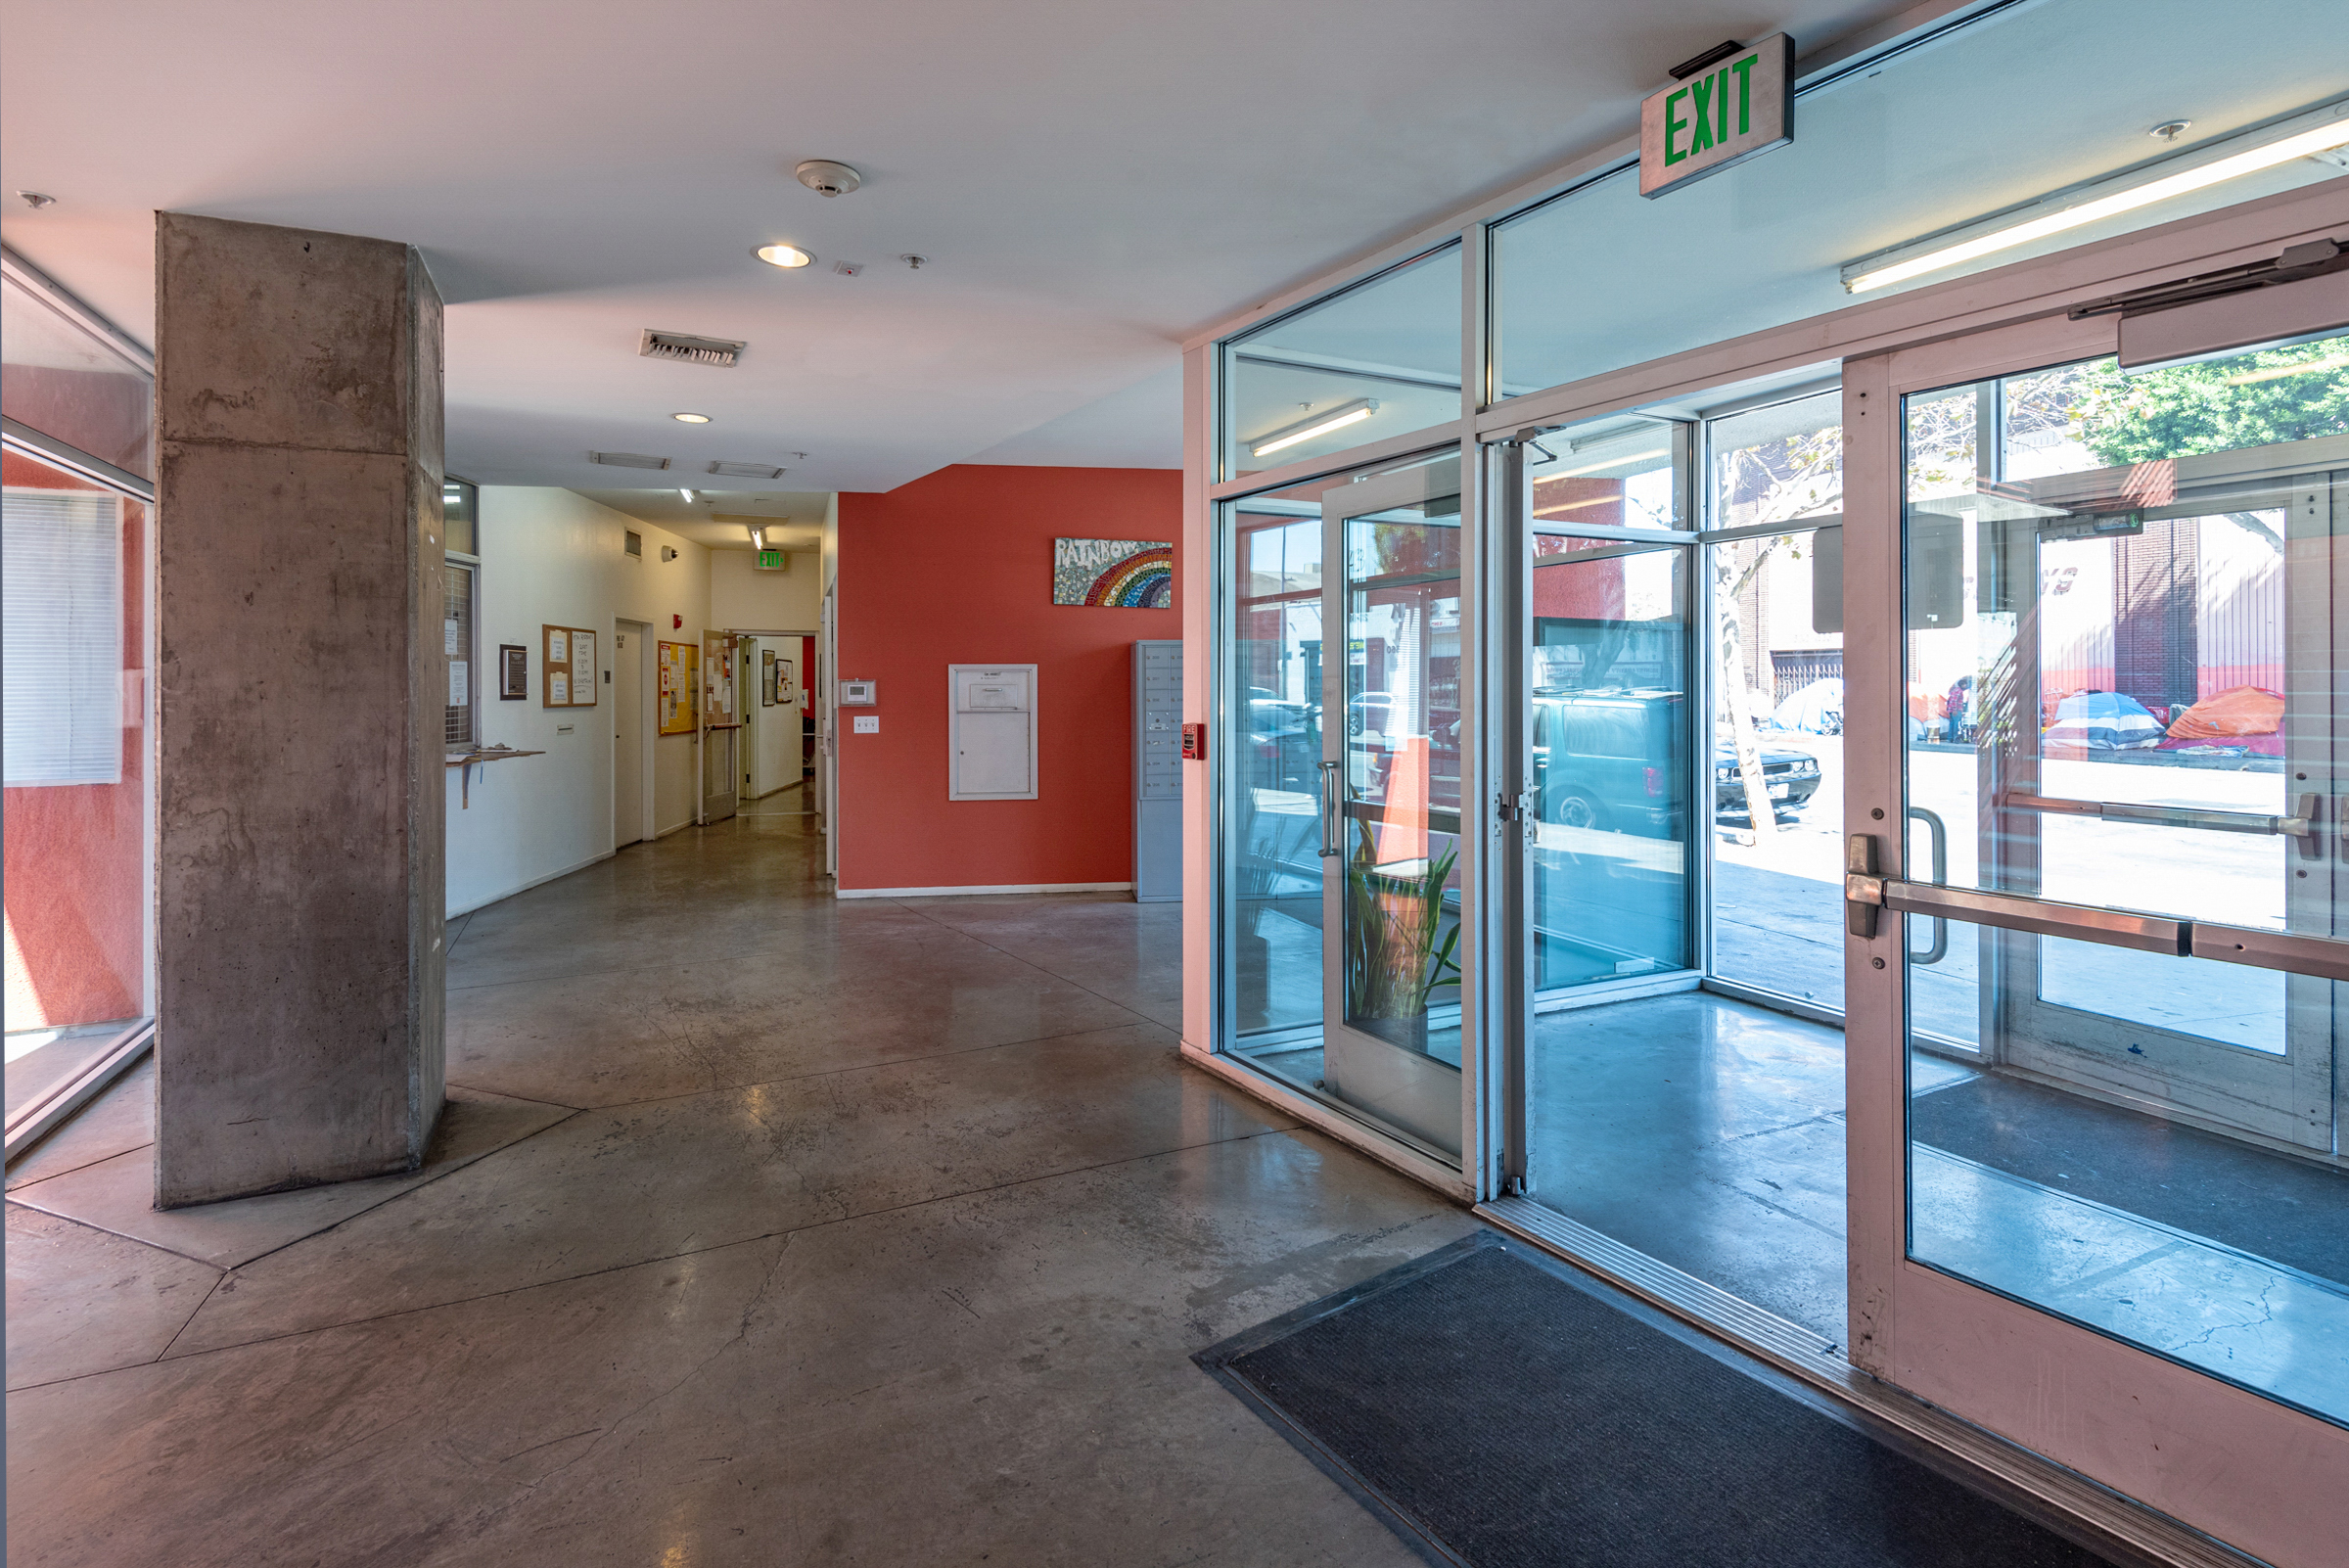 View of an entrance to the building, glass doors, and a concrete pillar.